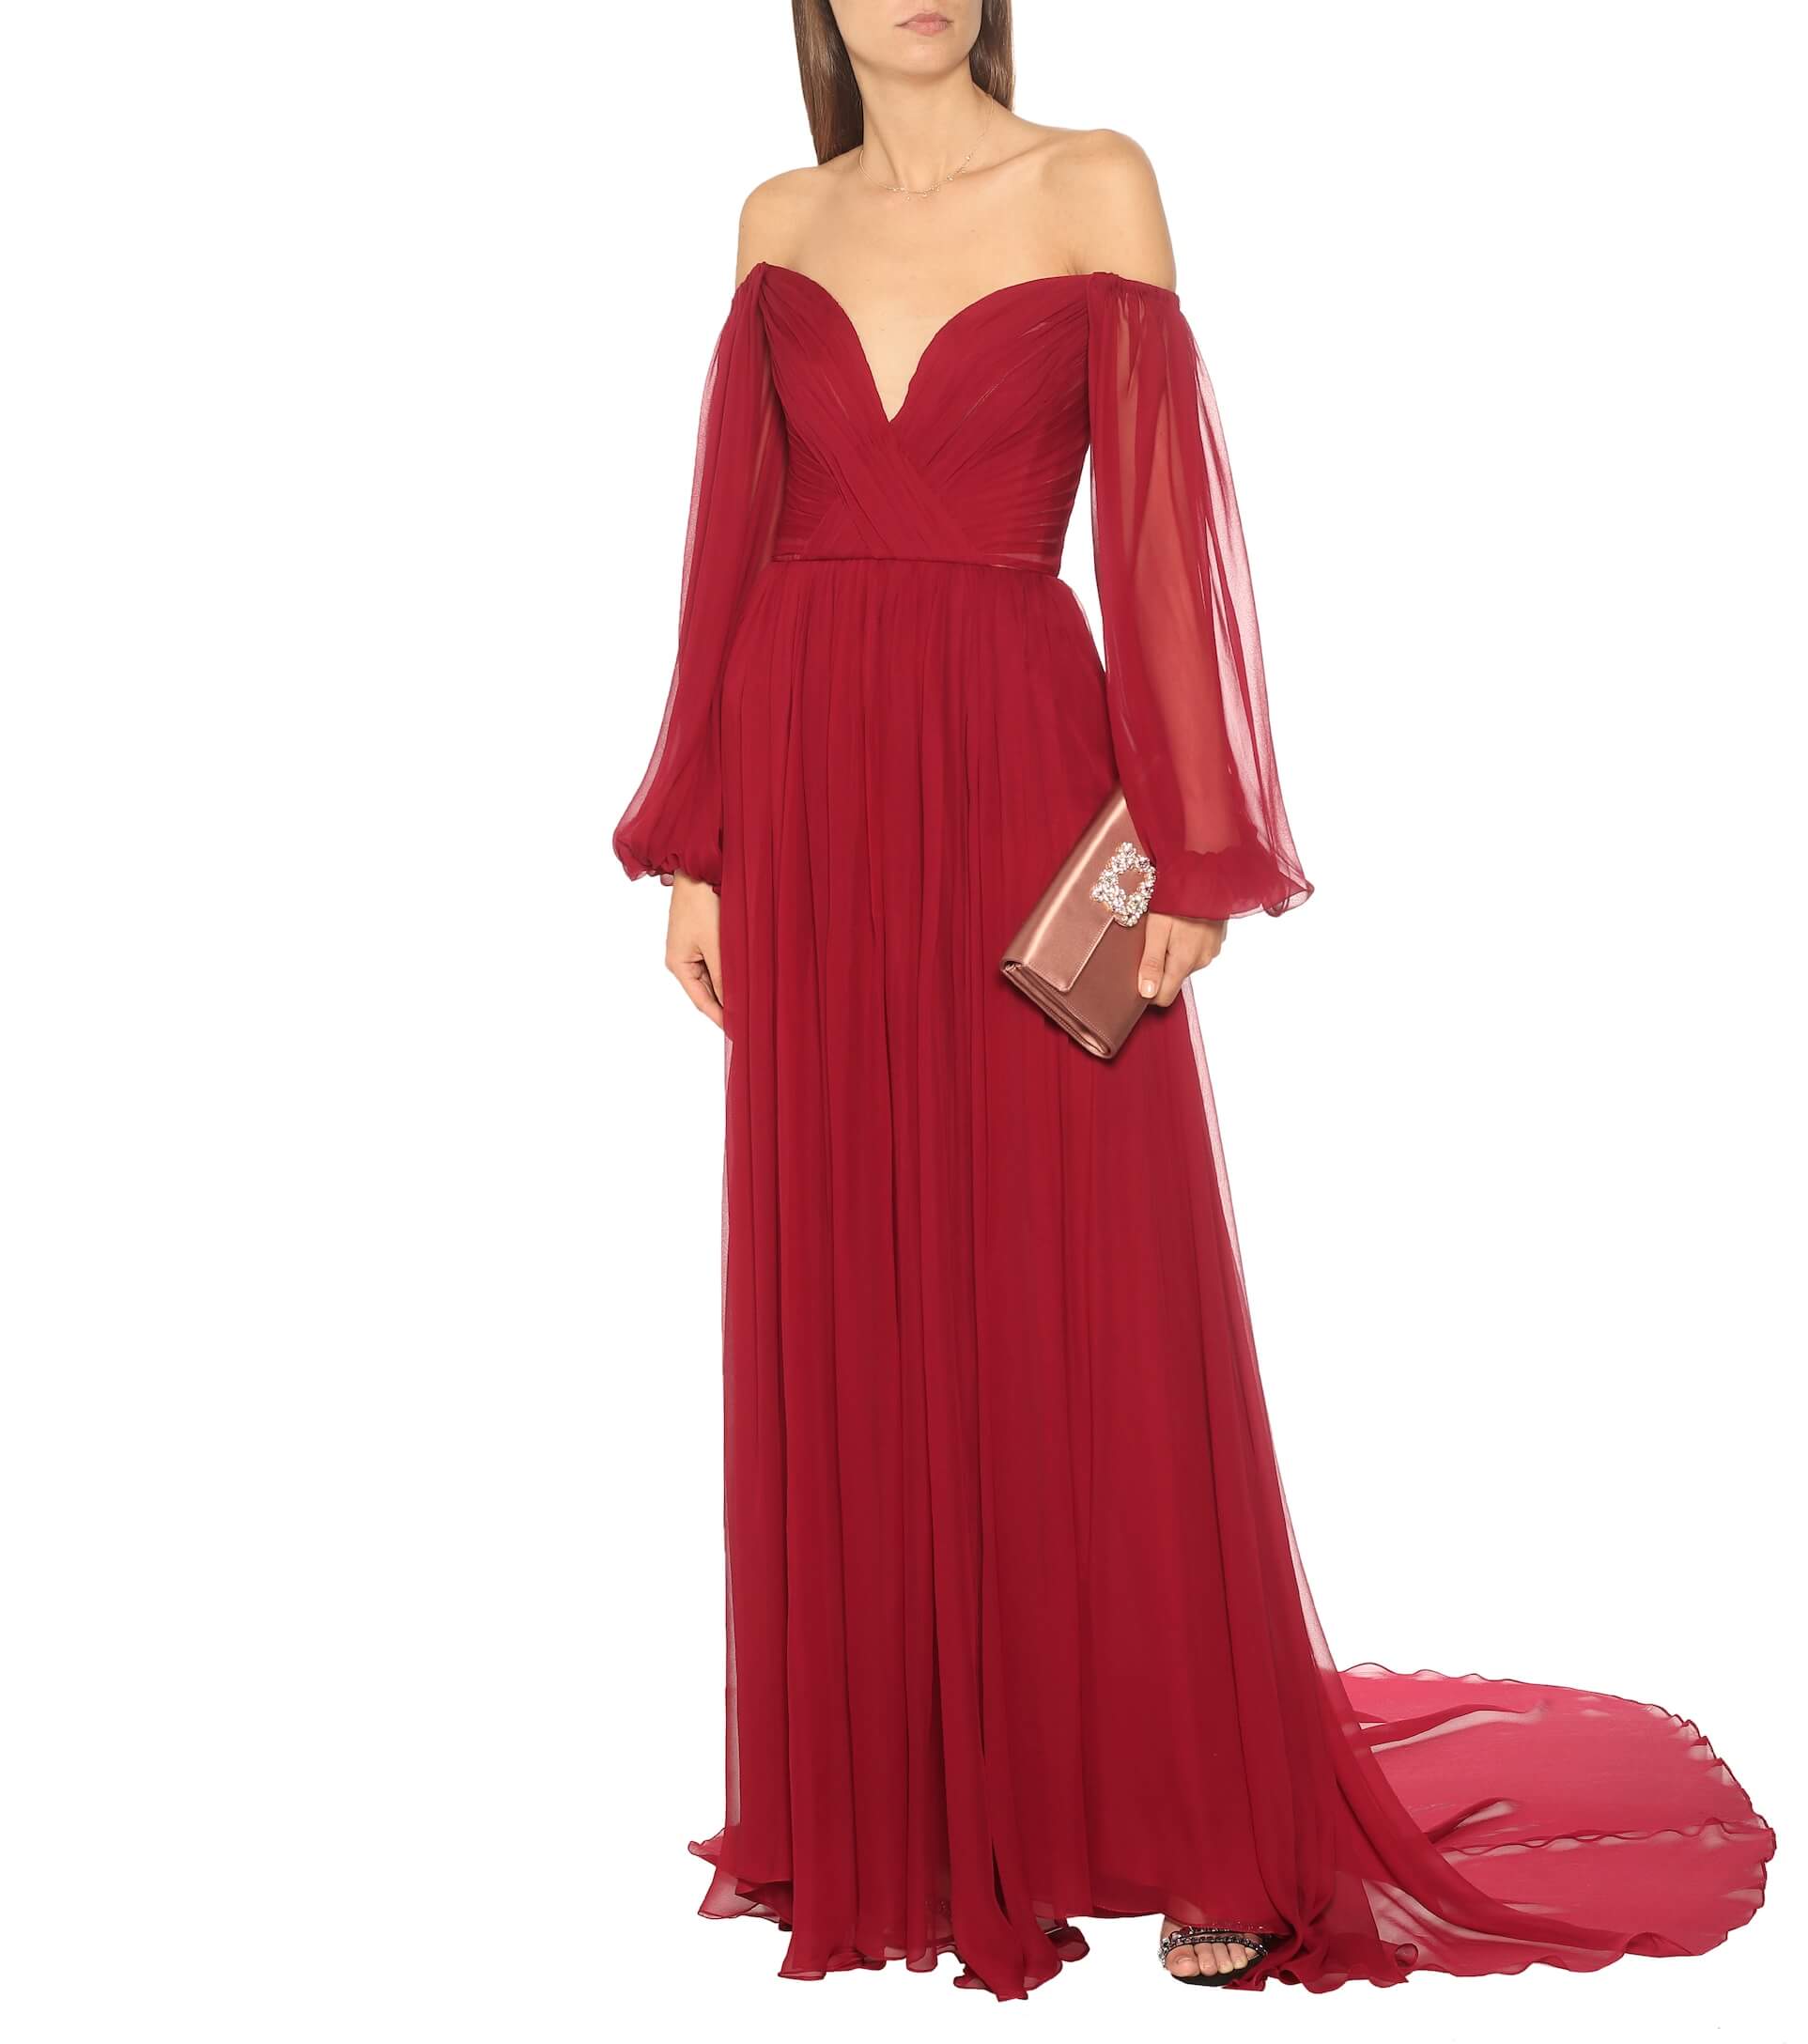 Monique lhuillier red gown you can’t resist!